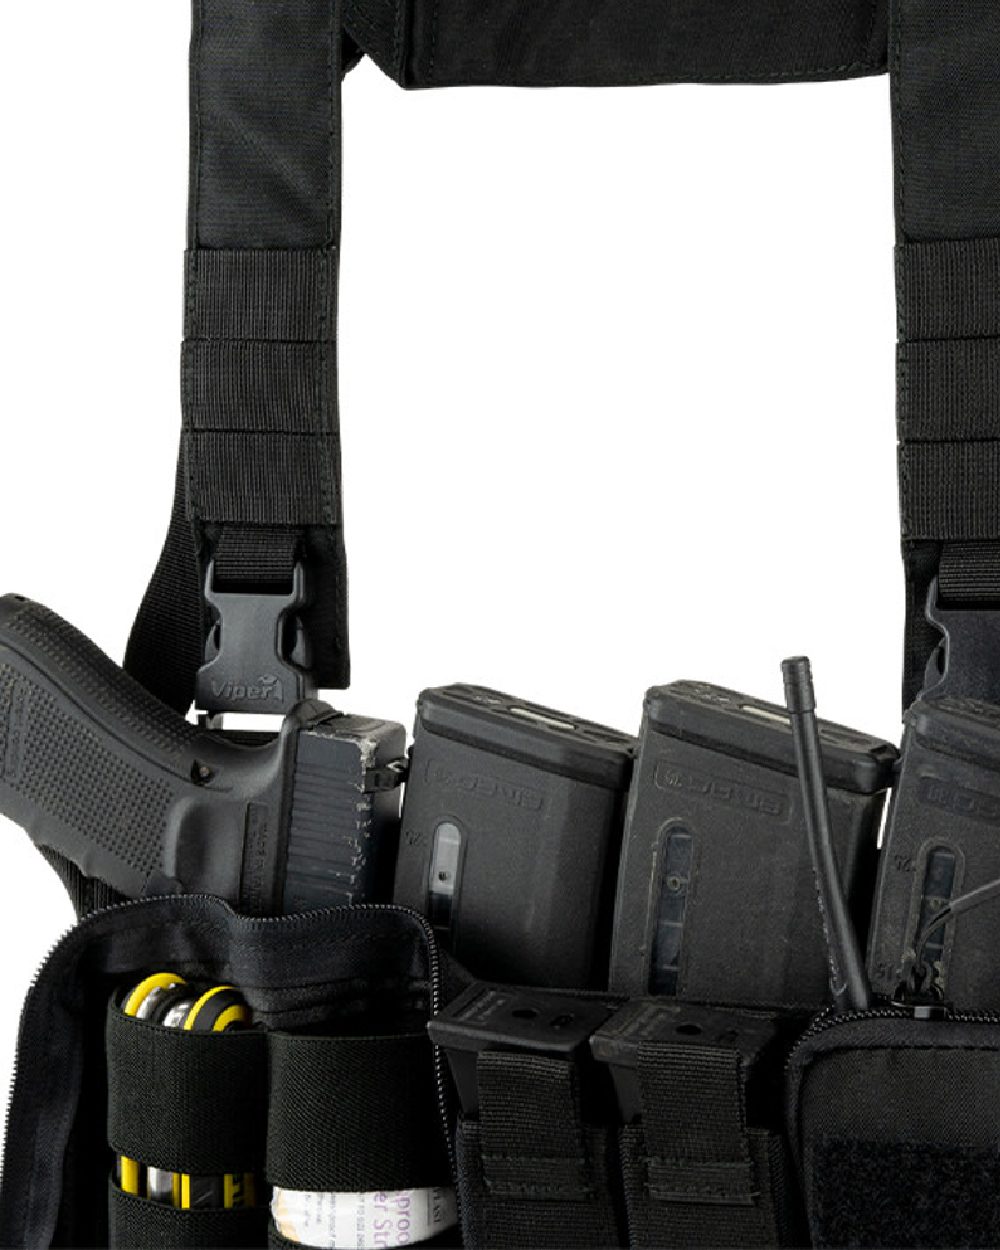 Viper VX Buckle Up Ready Rig in Black 